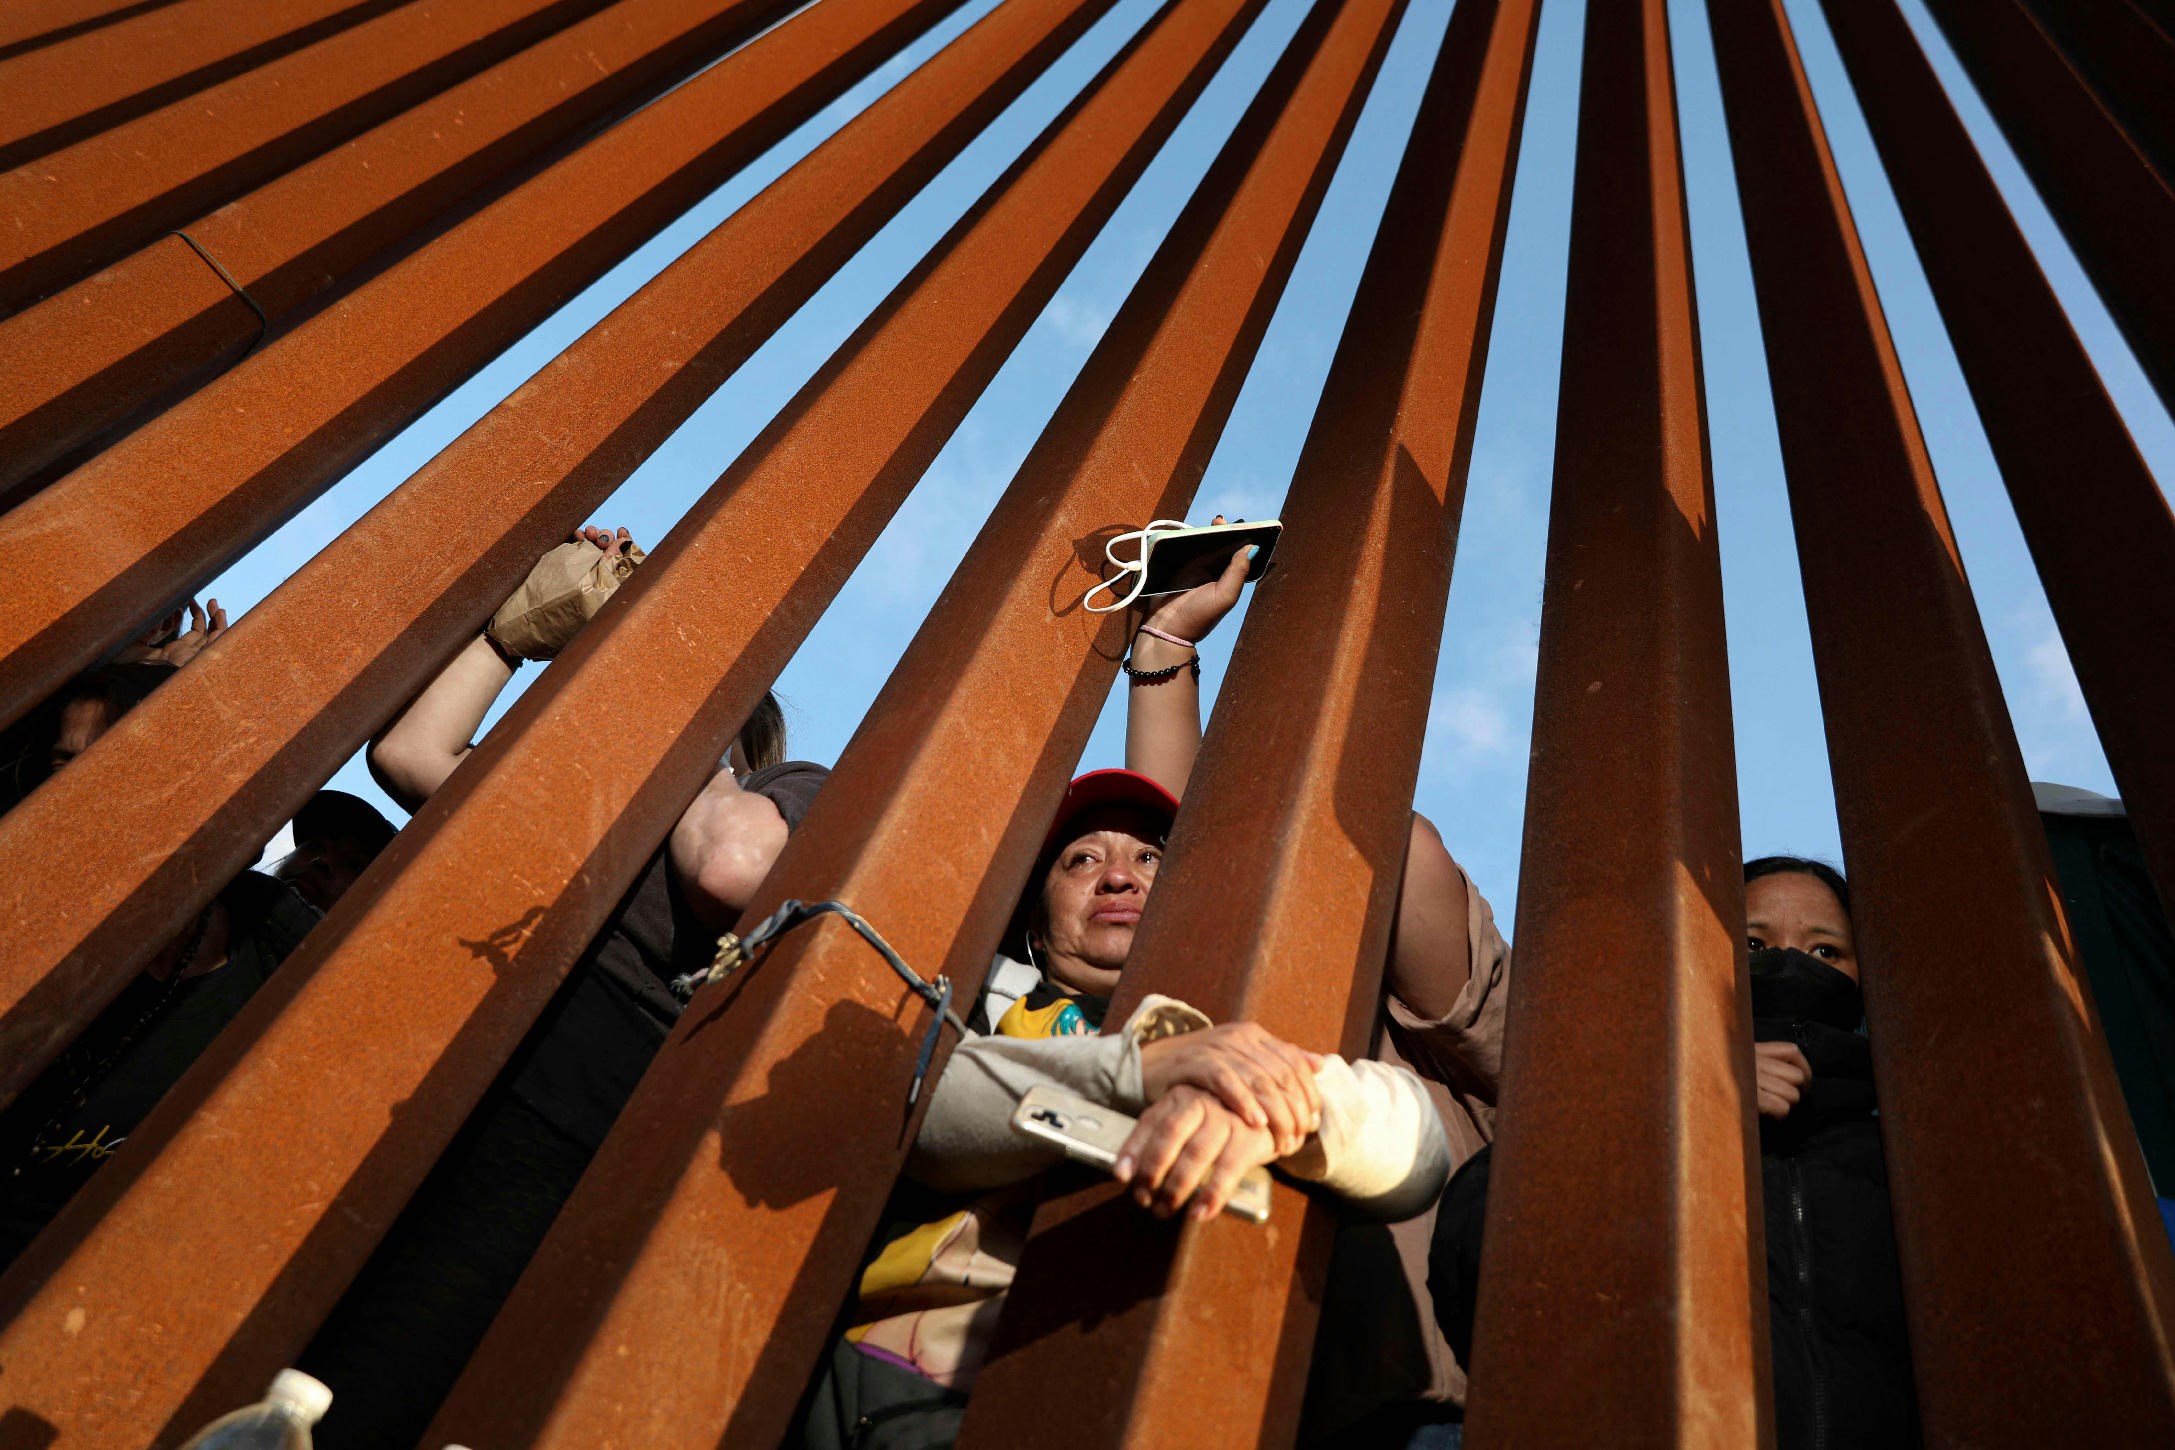 World: Biden will close the southern border if he is allowed to do so